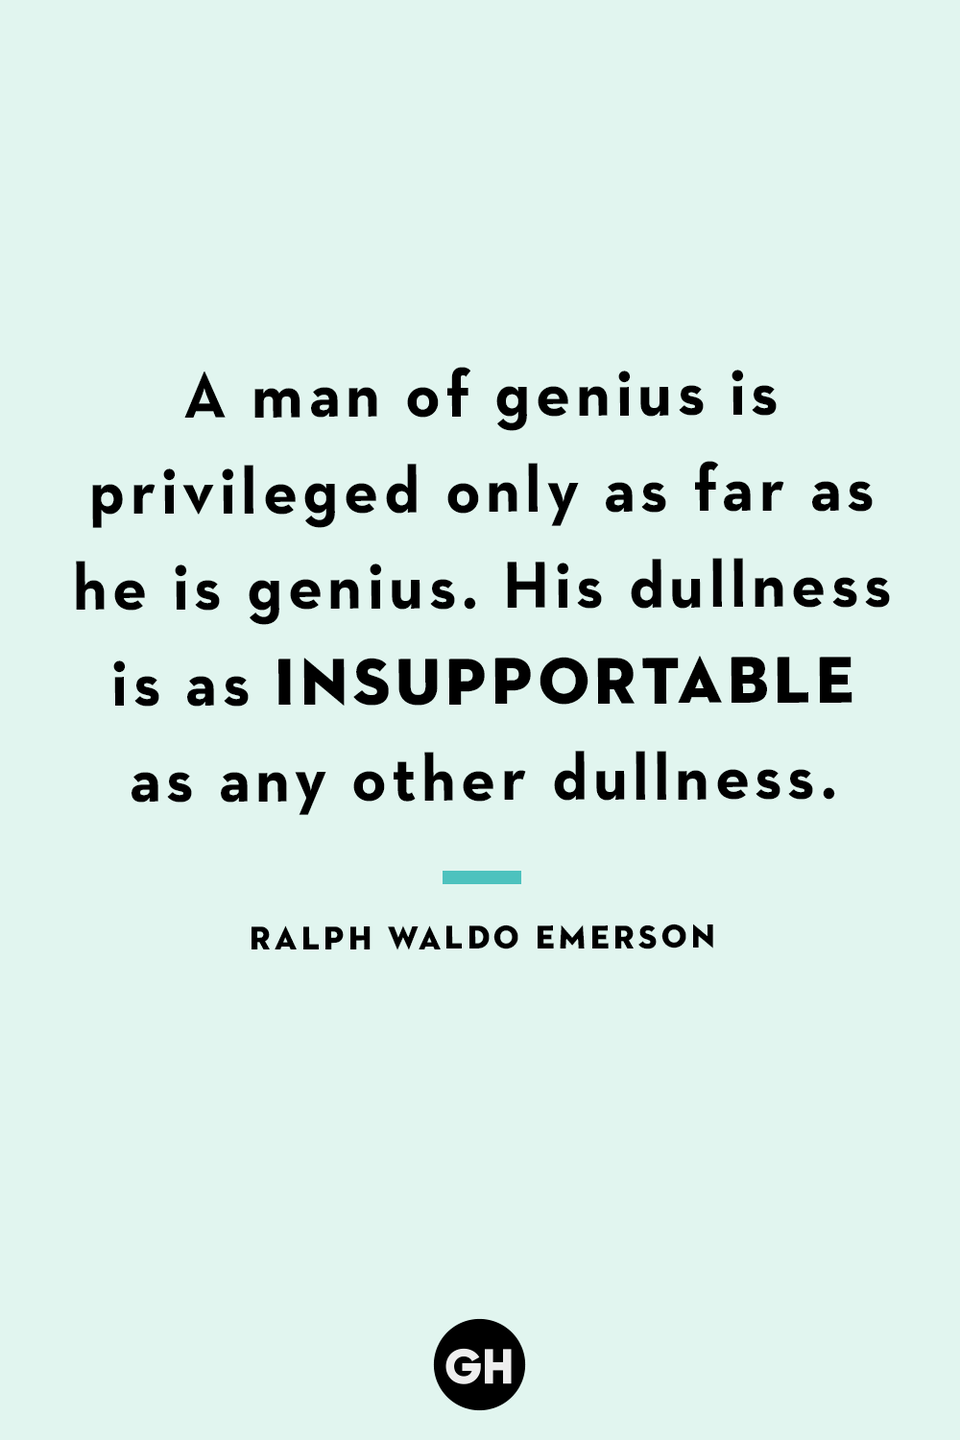 <p>A man of genius is privileged only as far as he is genius. His dullness is as insupportable as any other dullness.</p>